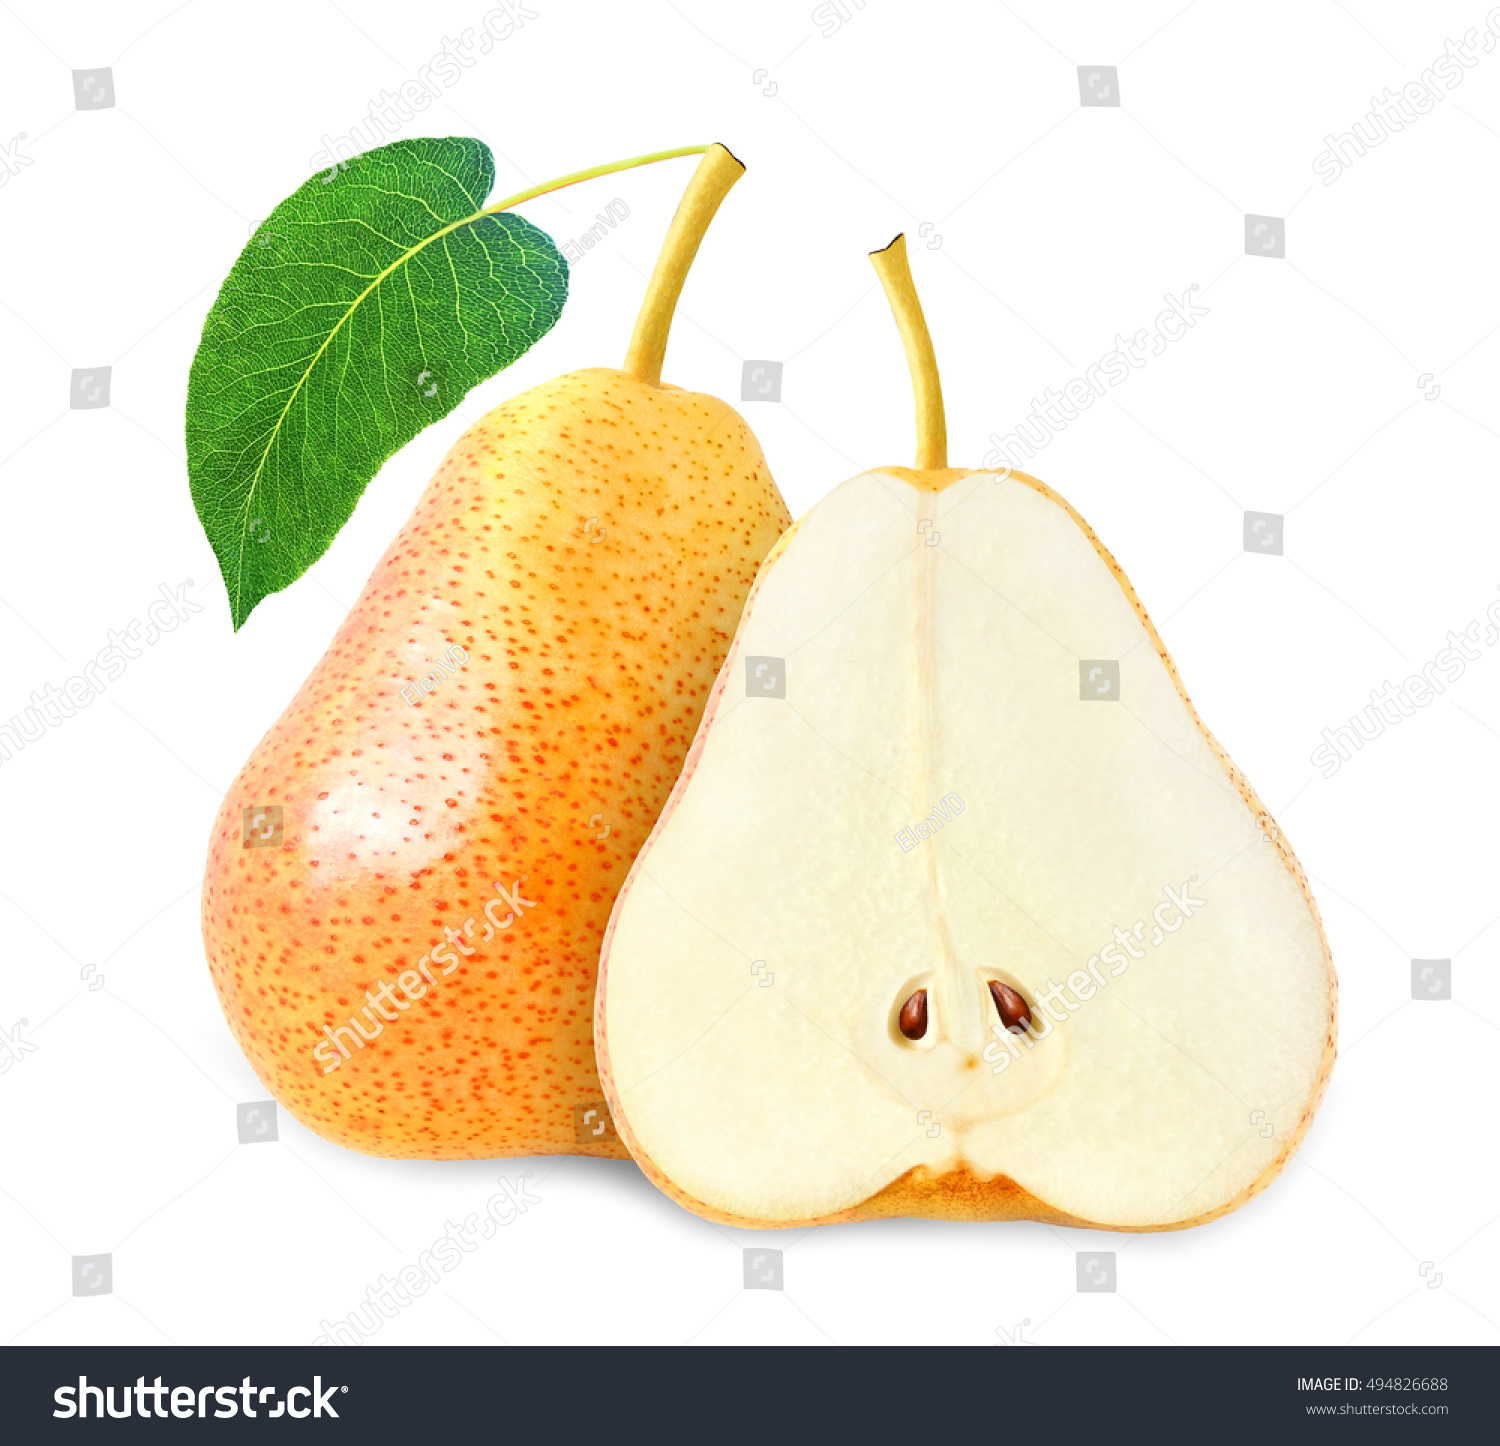 whole and cut yellow pear with leaf isolated on white background with clipping path #494826688